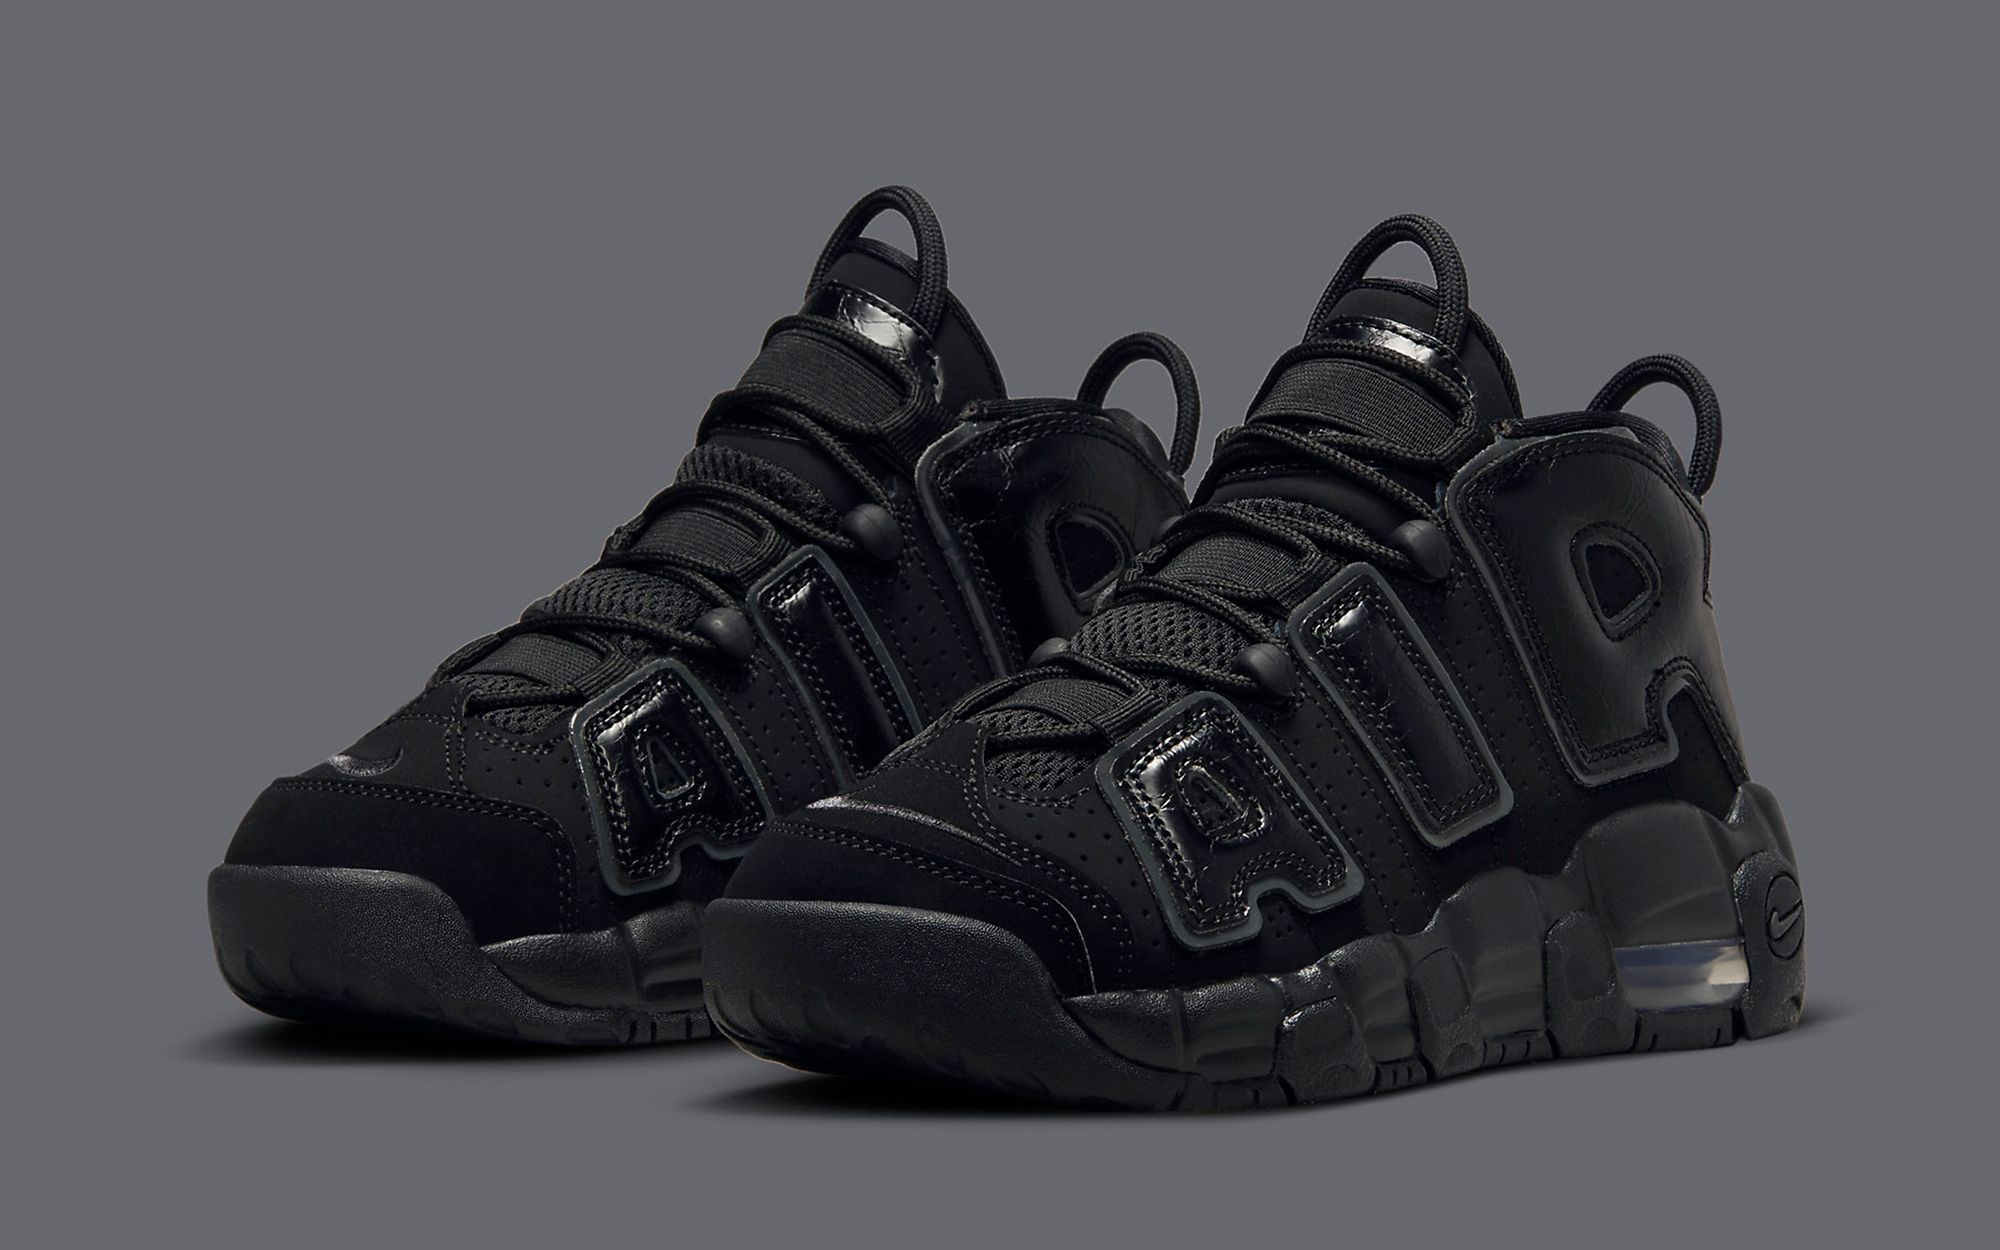 The Nike Air More Uptempo 